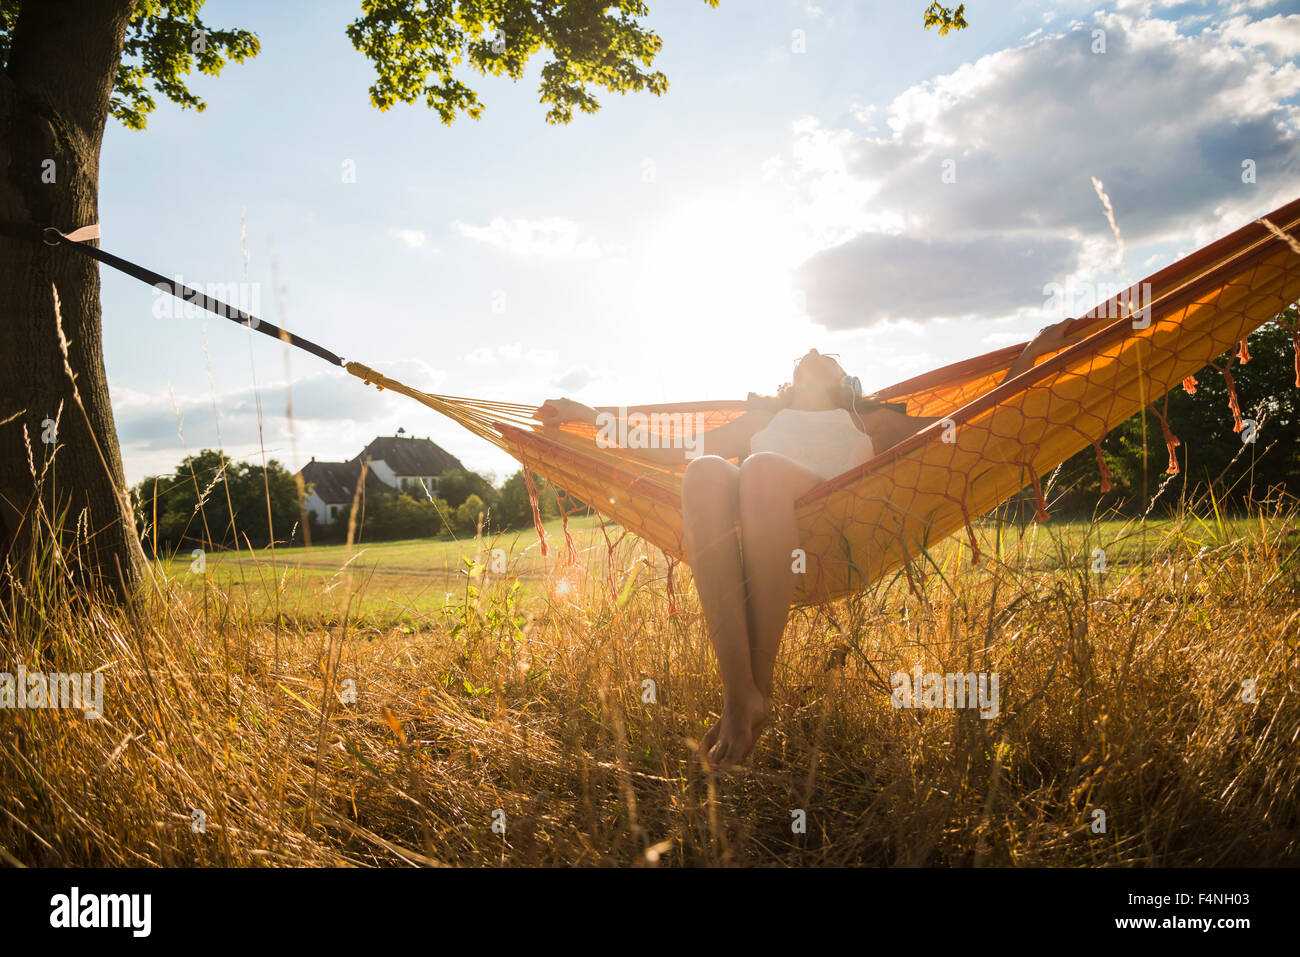 Woman with headphones lying in a hammock relaxing in nature Stock Photo